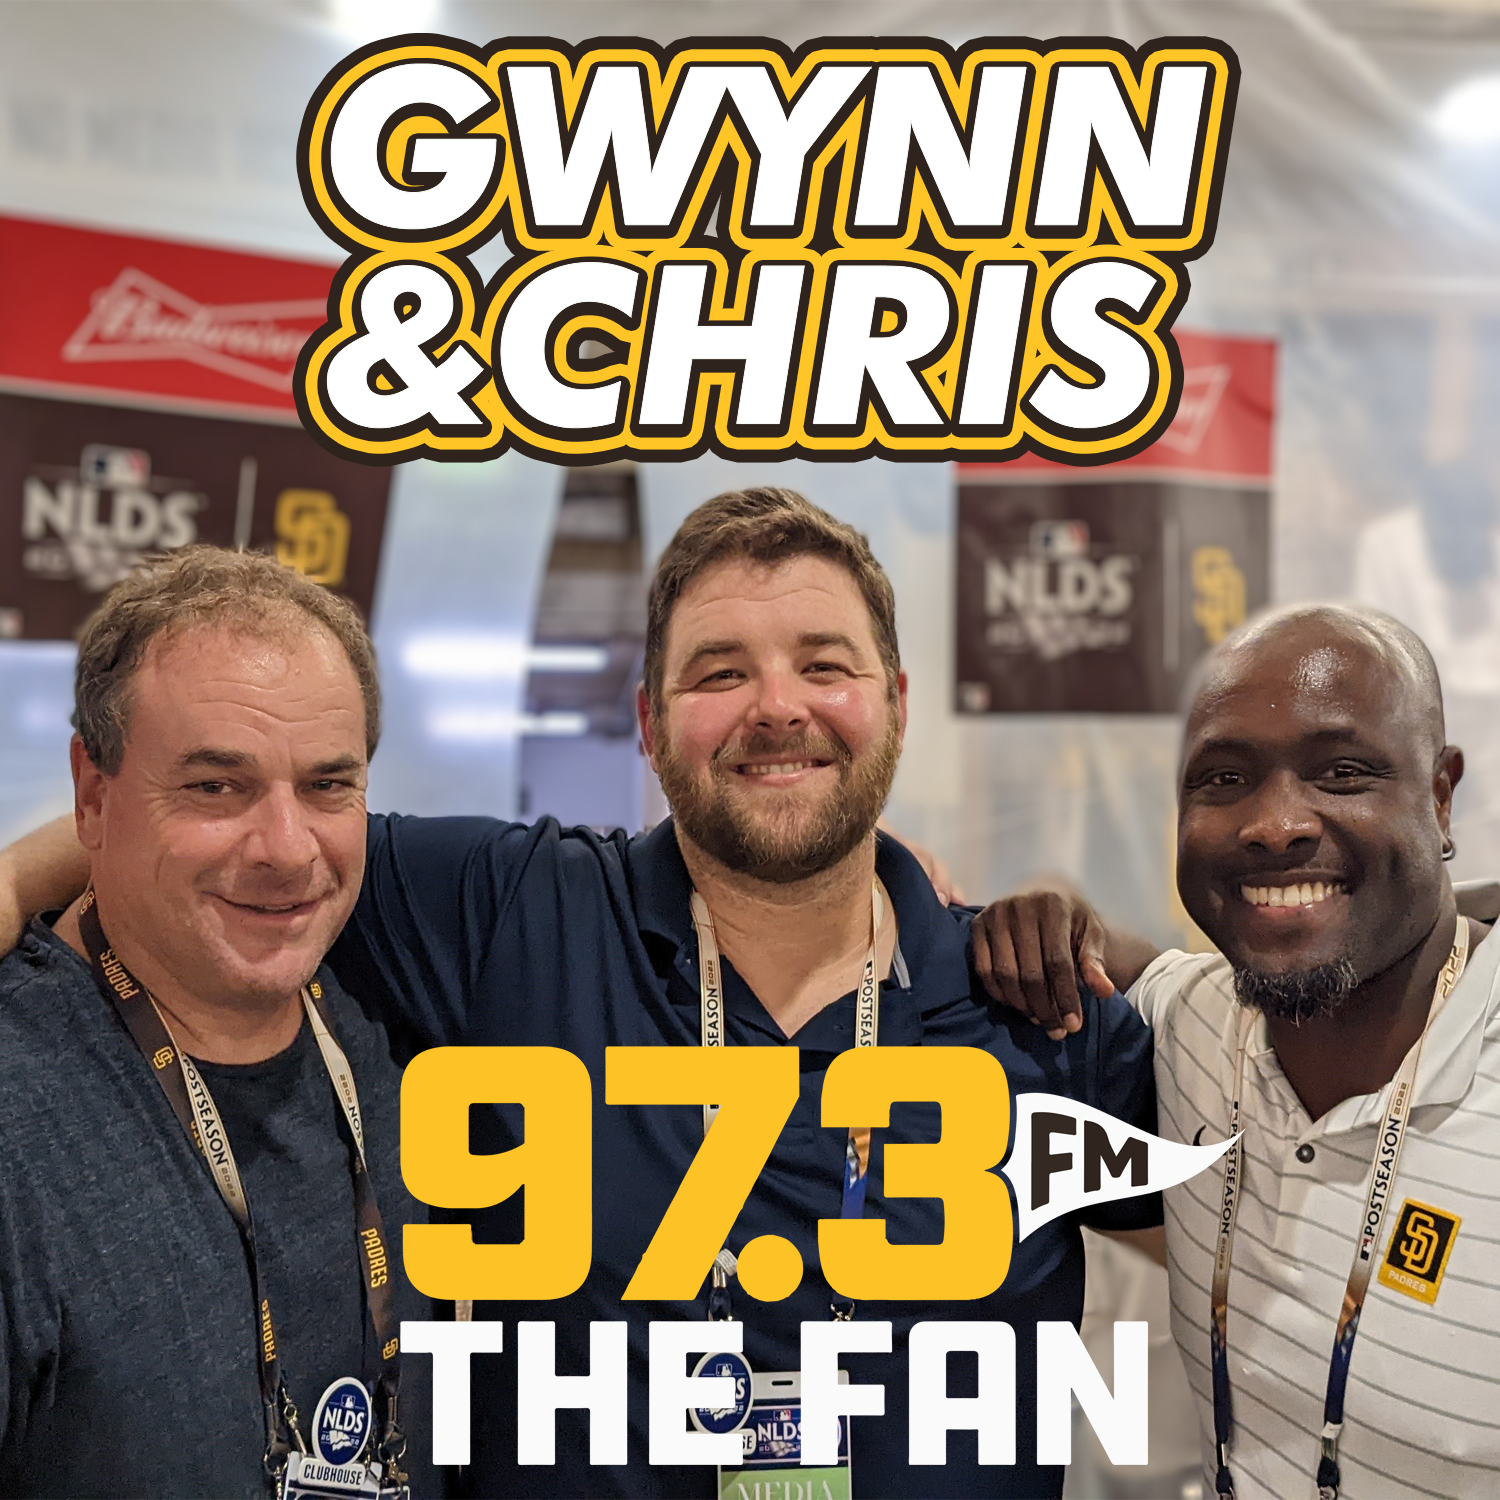 9.14.21 Gwynn & Chris Hour 1: Padres recap and Mark Sweeney joins the show!